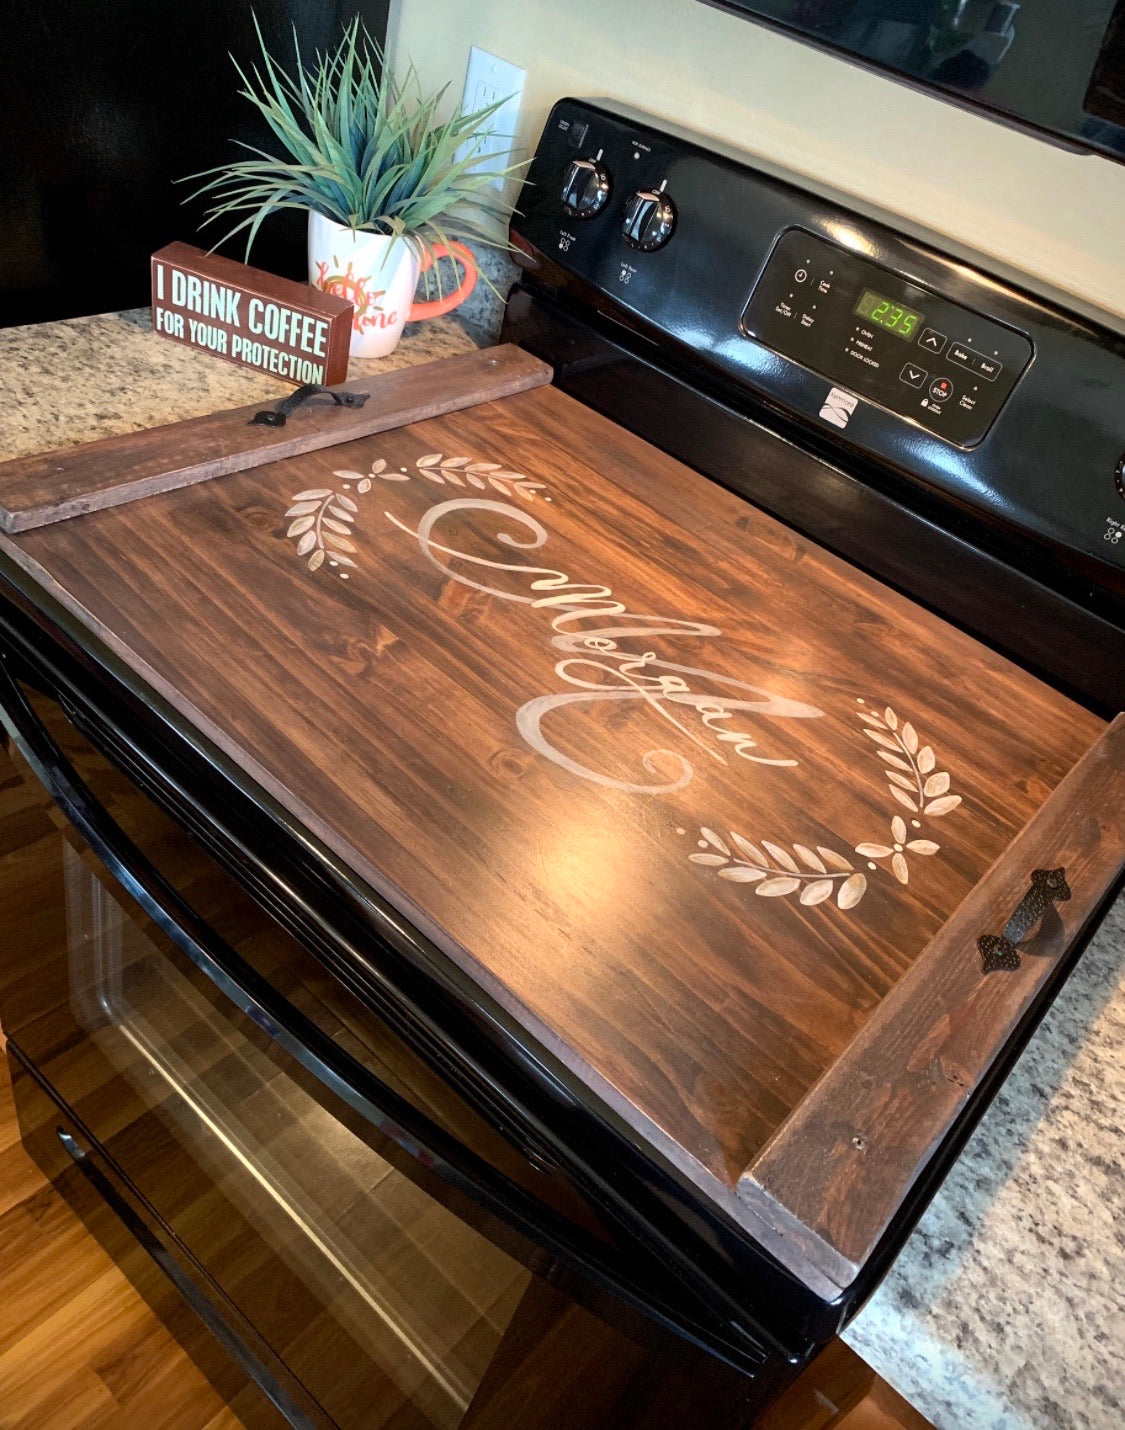 Stove & sink cover { Pine } You choose color. Stained & painted. 4 coats polyurethane. Handles. 3 ft long x 24 inch. 2 in 1! You choose color. - Stacy's Pink Martini Boutique